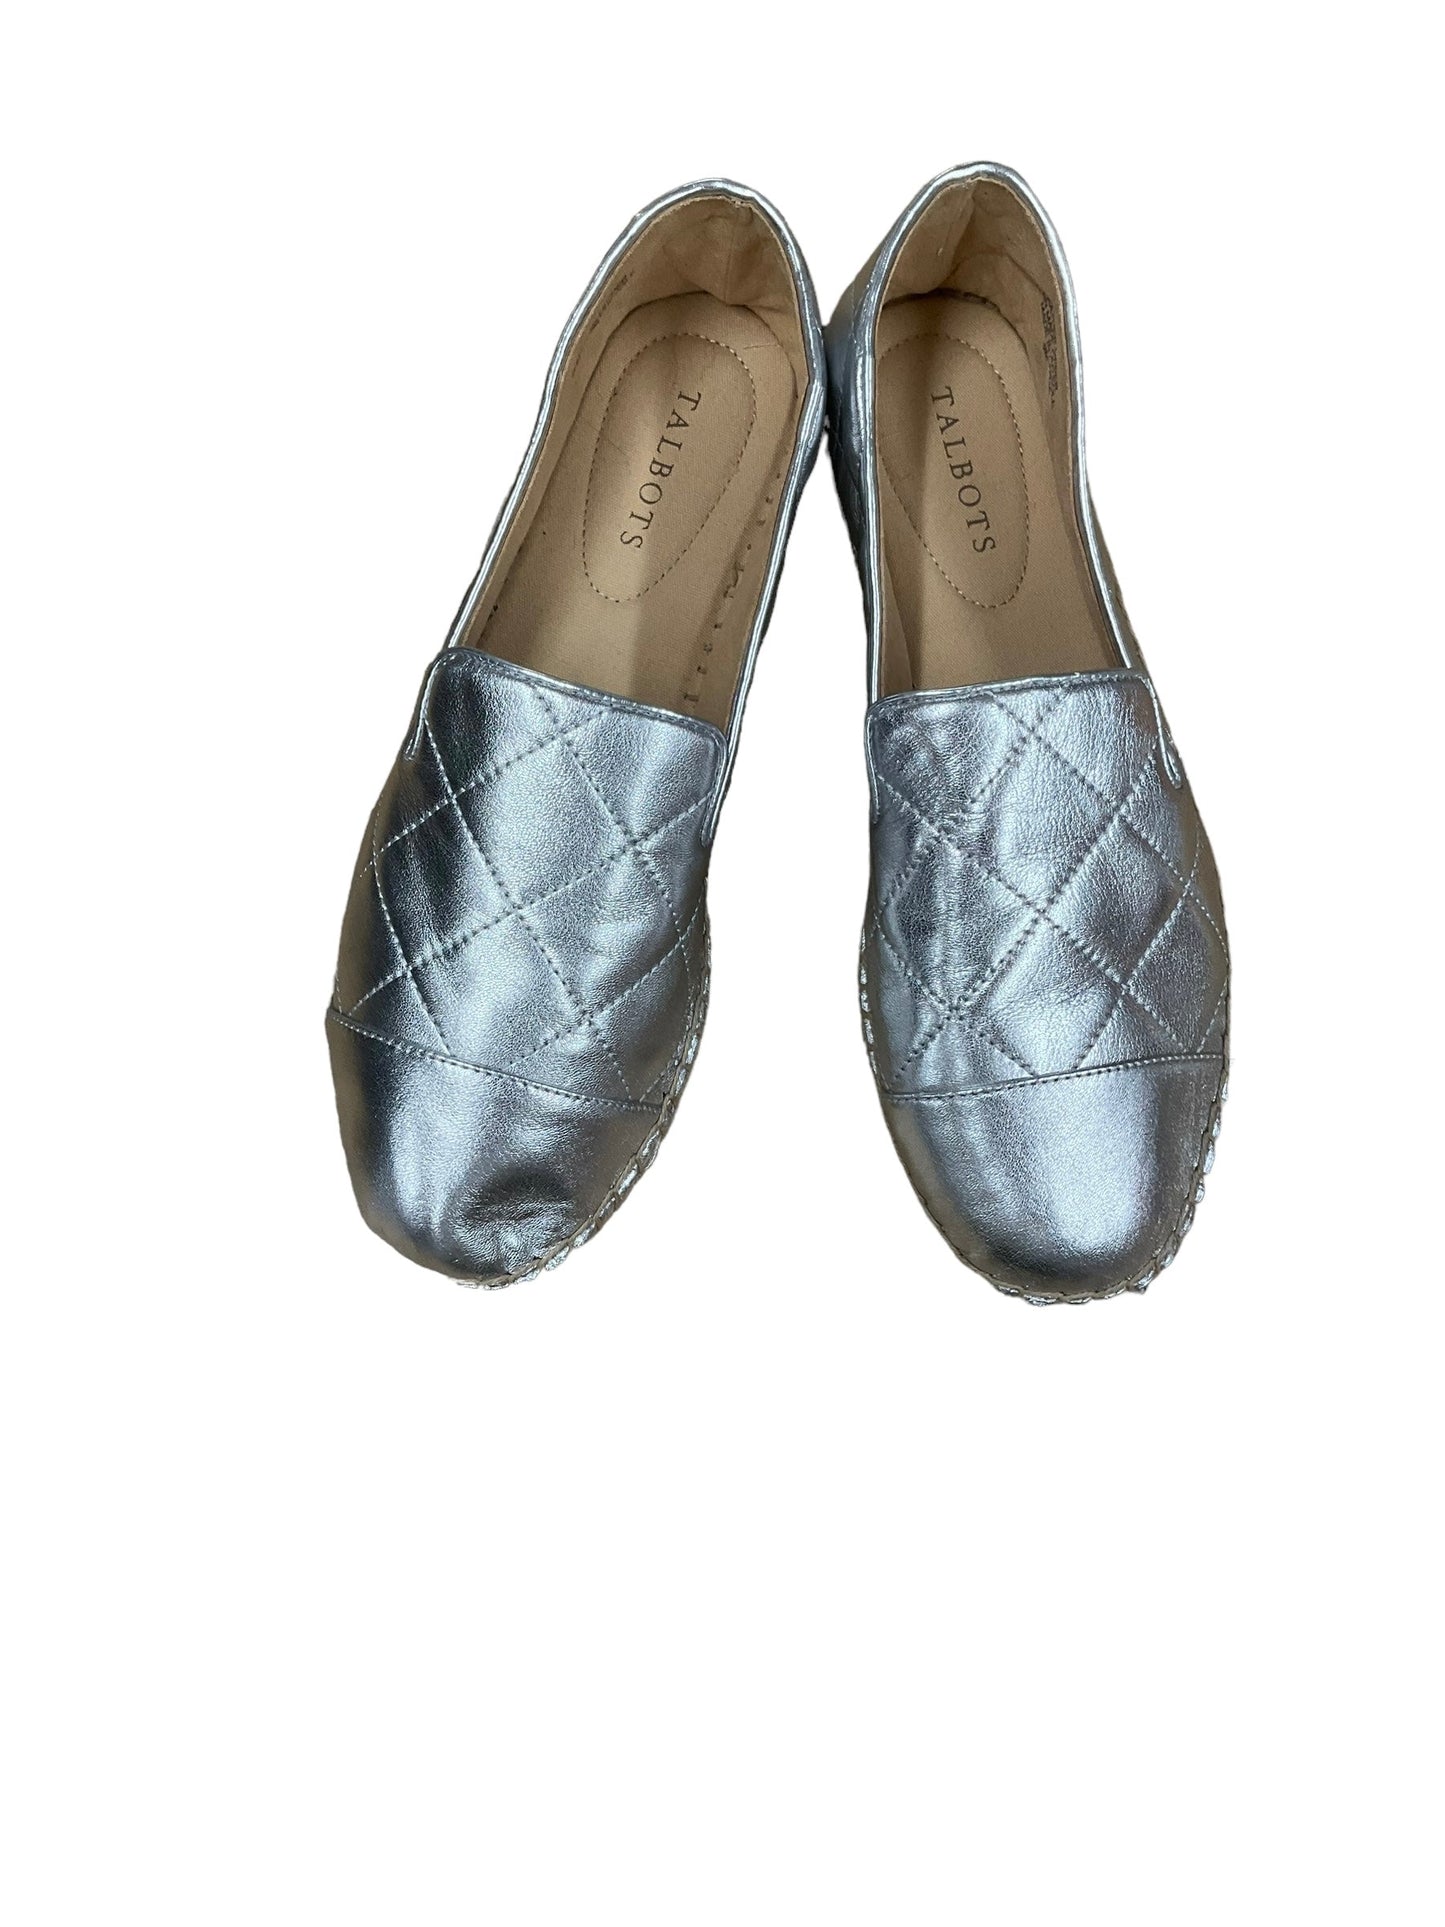 Silver Shoes Flats Talbots, Size 9